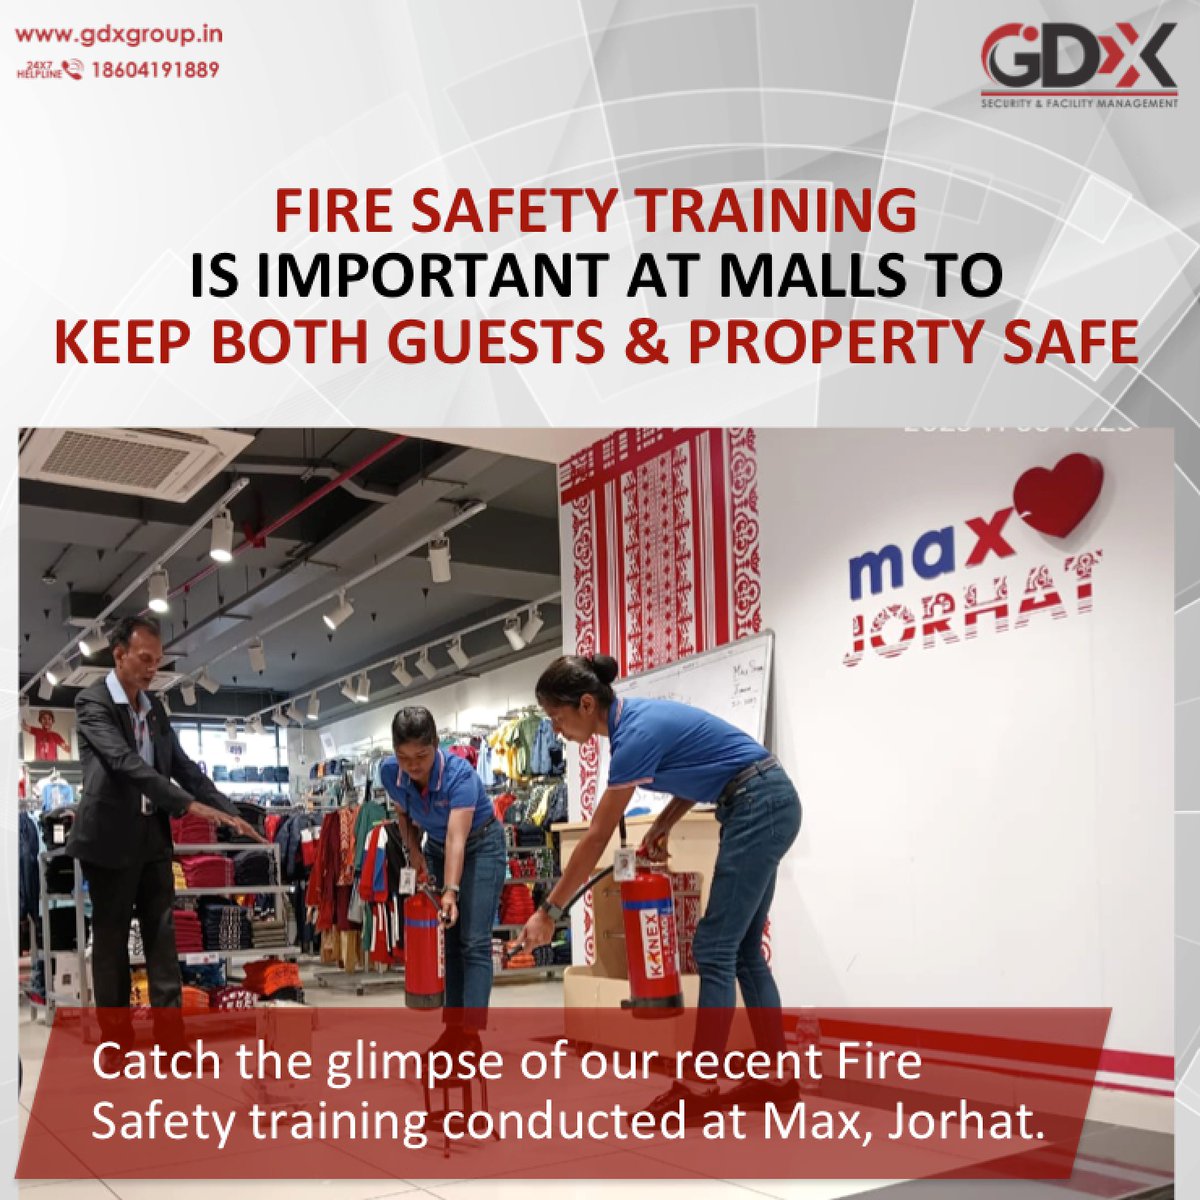 Catch the glimpse of our recent Fire Safety training conducted at Max, Jorhat.
#GDXGroup #GDXtech #GDXuniqueservices #GDX37YearsofServiceExcellence #SecurityServices #GDXtraining